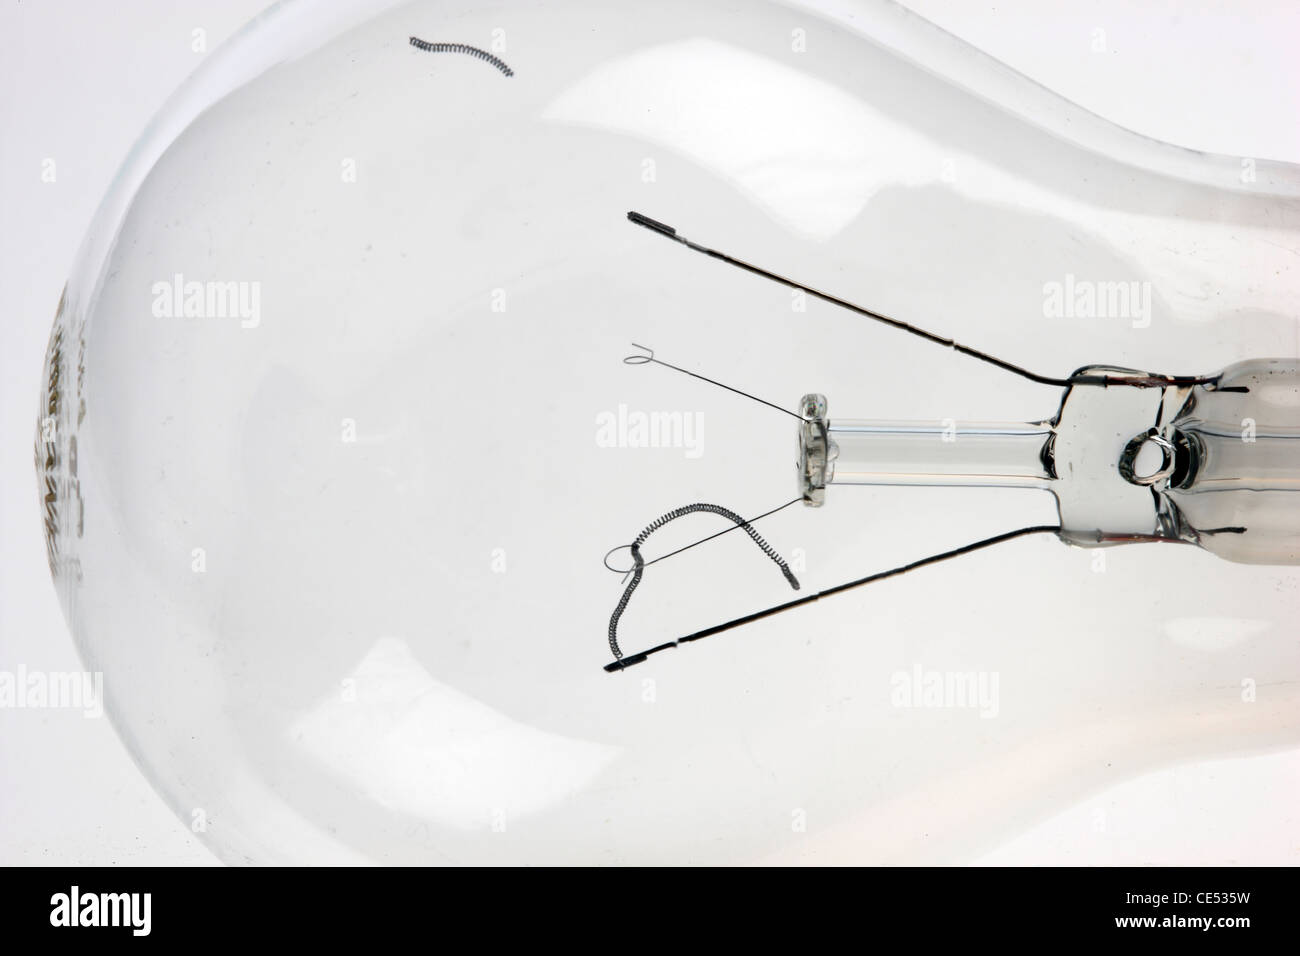 Electrical light bulb, torn, damaged glowing filament. Stock Photo